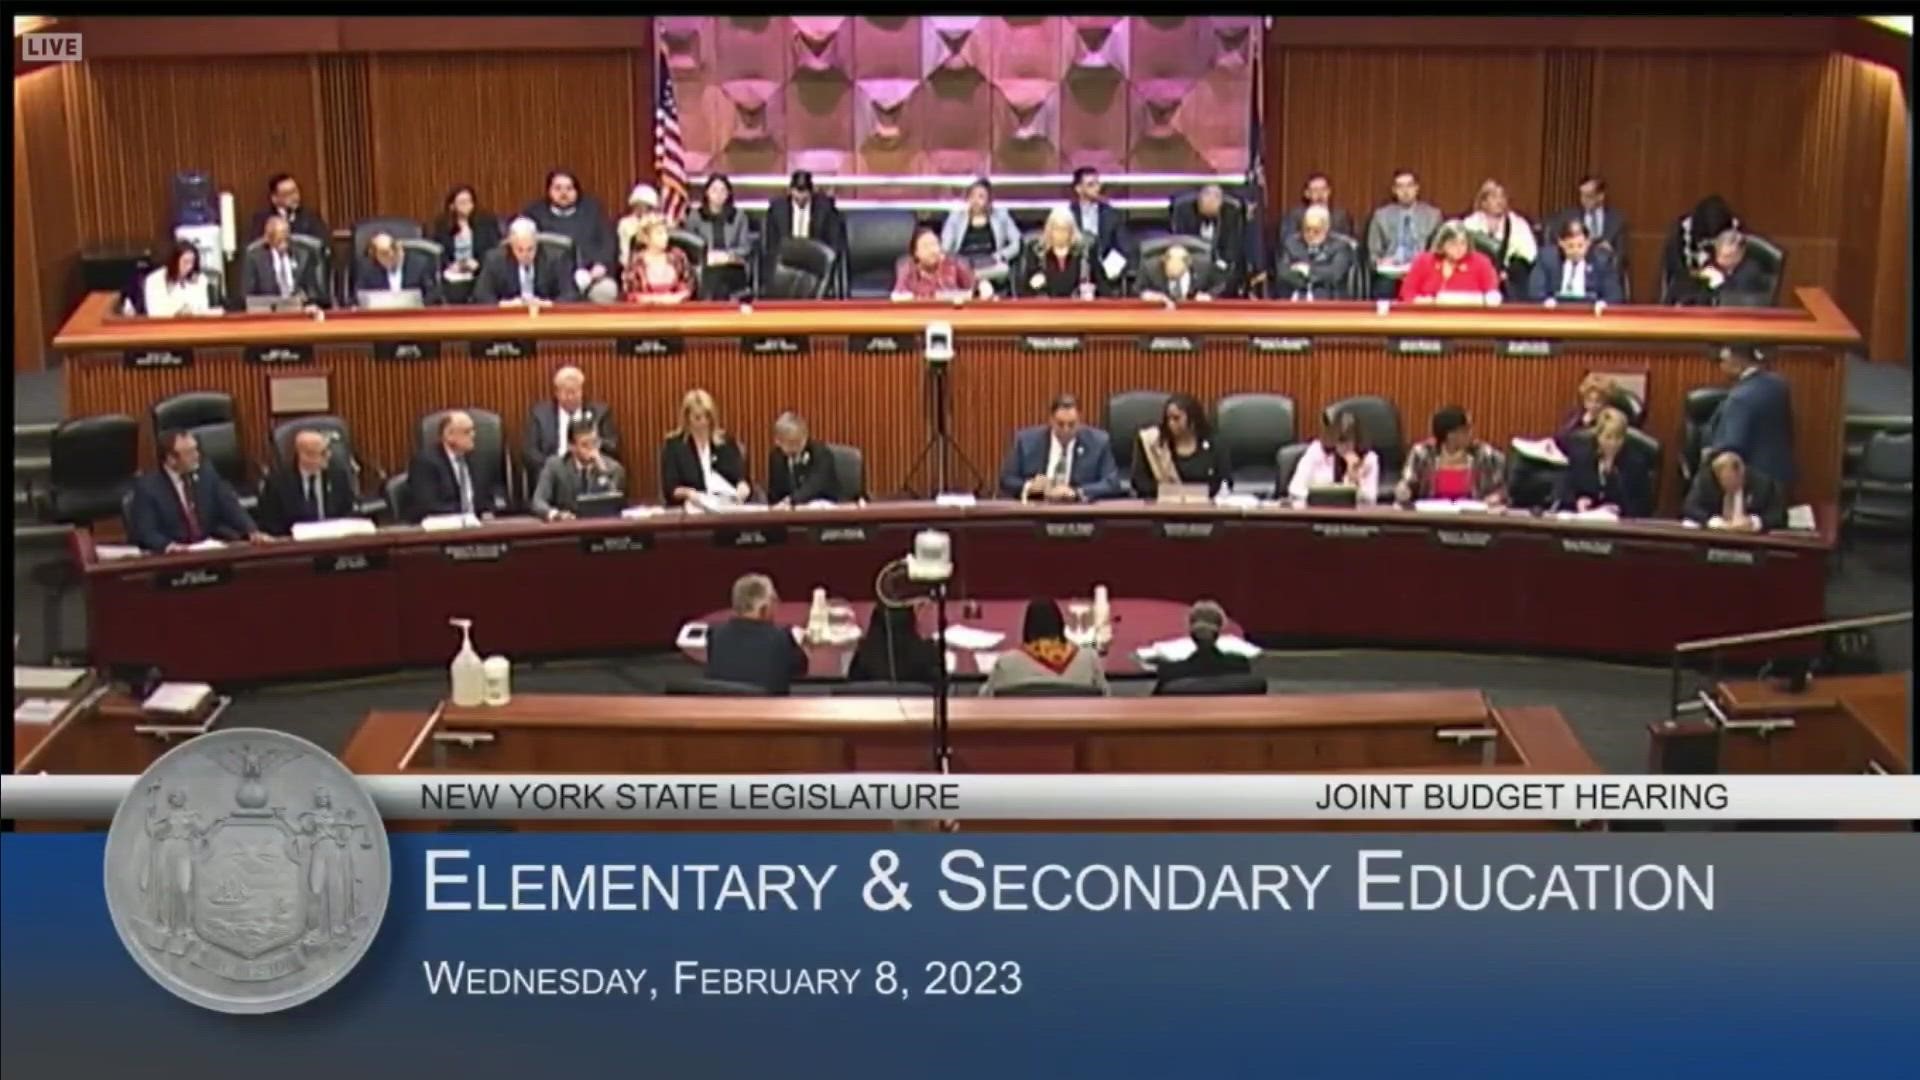 testimony on other education related items like school nutrition for cafeteria meals, technology like computers and then school transportation.